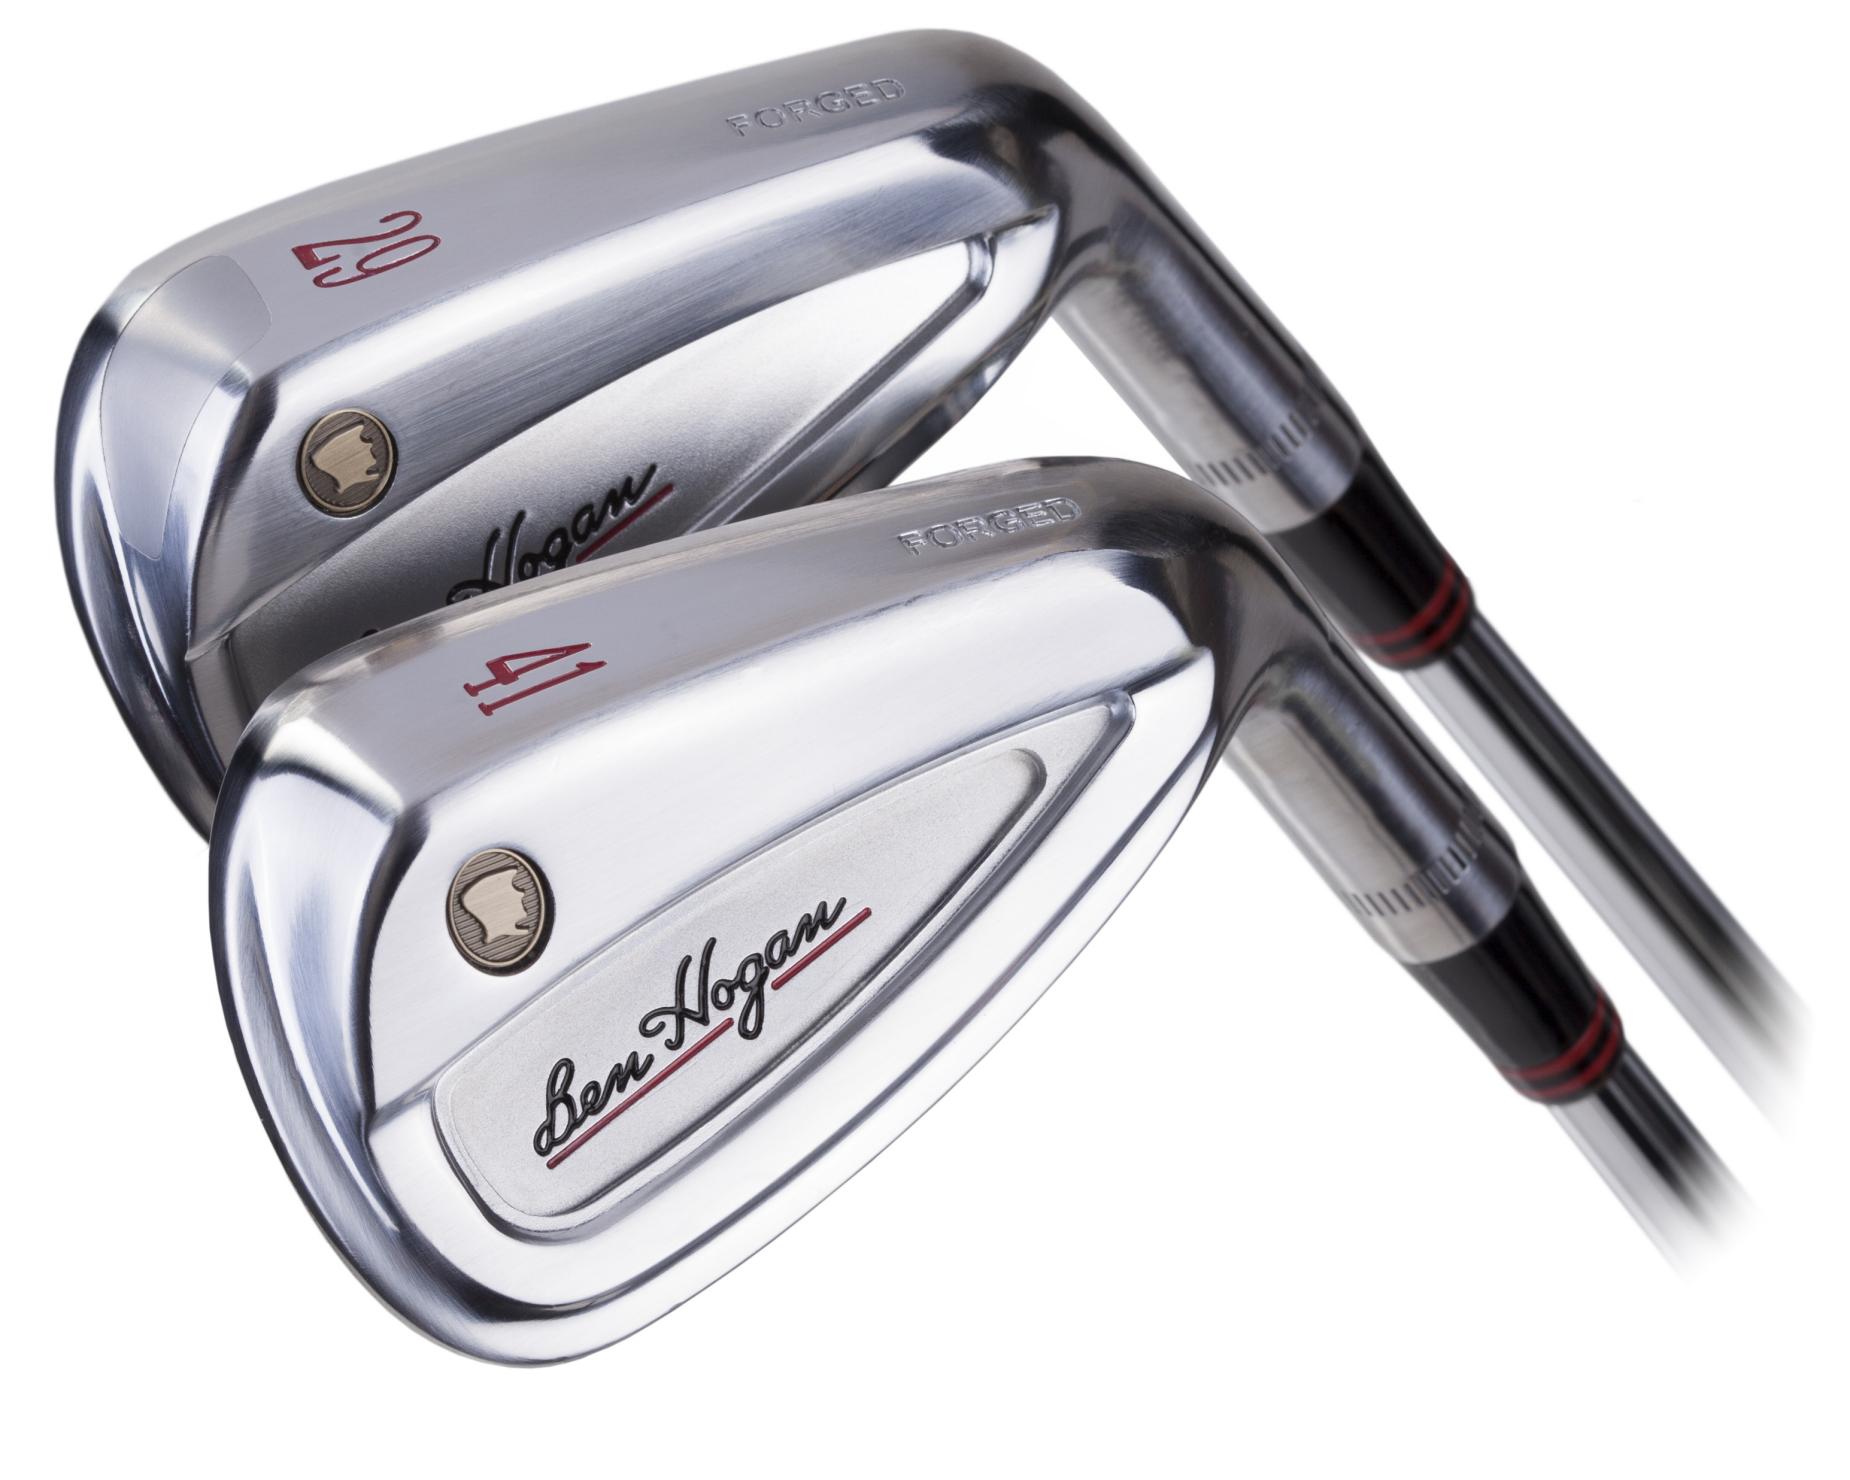 New Ben Hogan Co. irons offer new take on game improvement This is